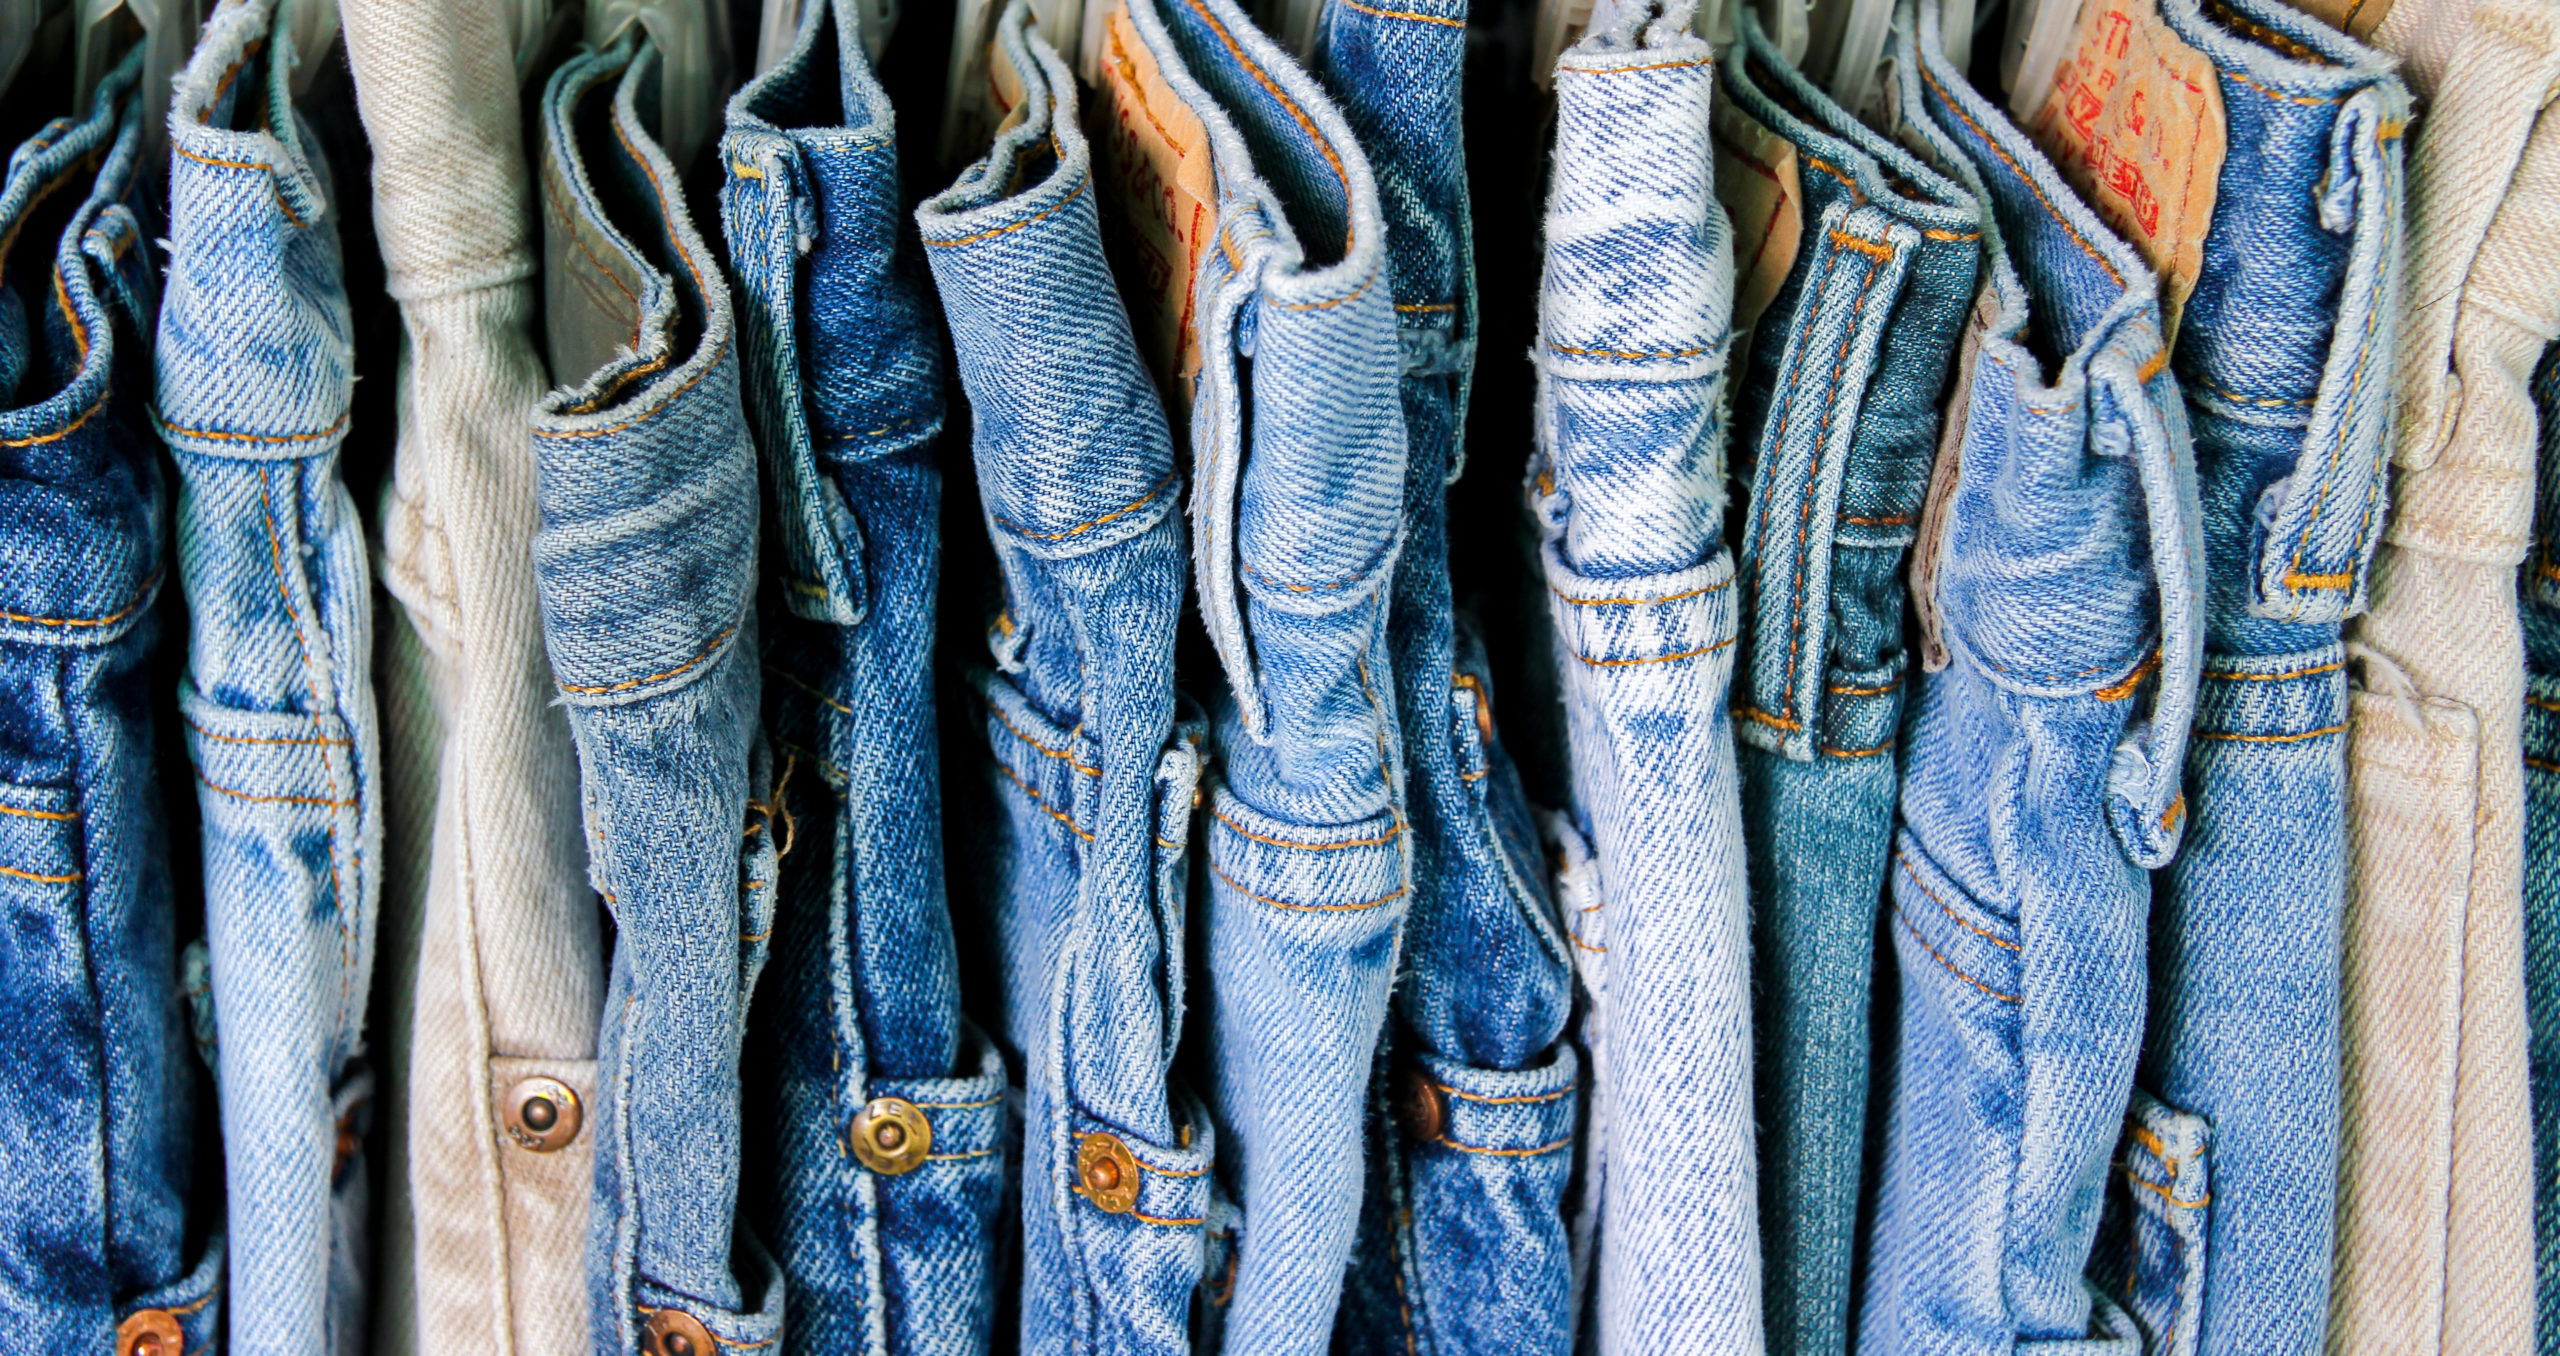 Removing Stains from Denim Garments